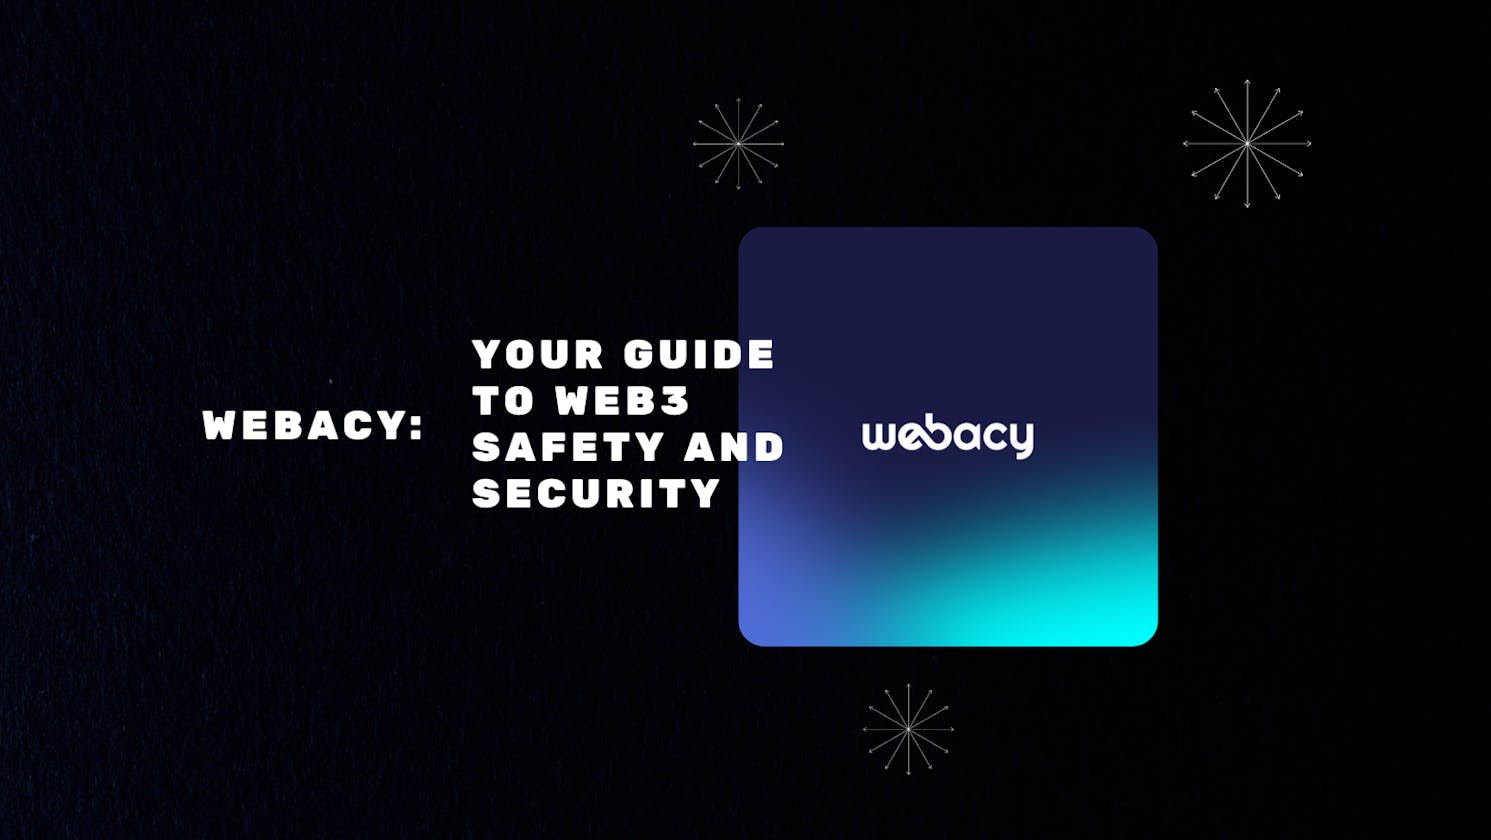 Webacy: Your Guide to Web3 Safety and Security